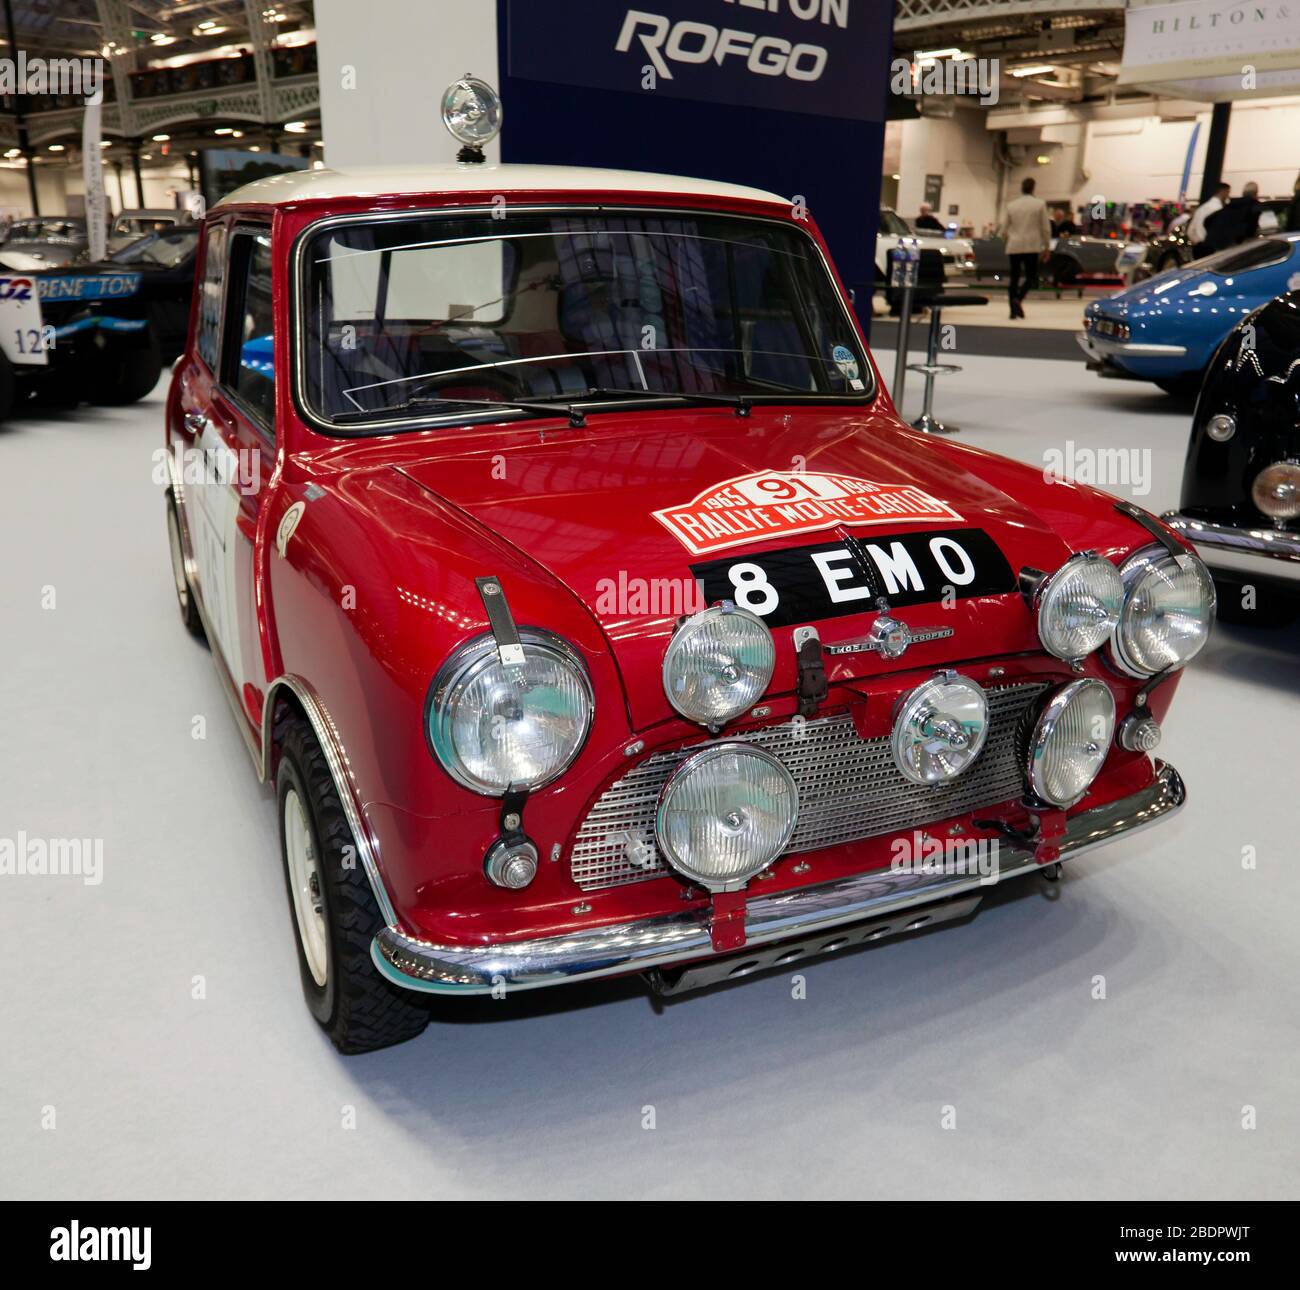 Three-quarters Front View of a Red, Rally-Prepared, 1963, Morris Mini Cooper on display at the 2020 London Classic Car Show Stock Photo